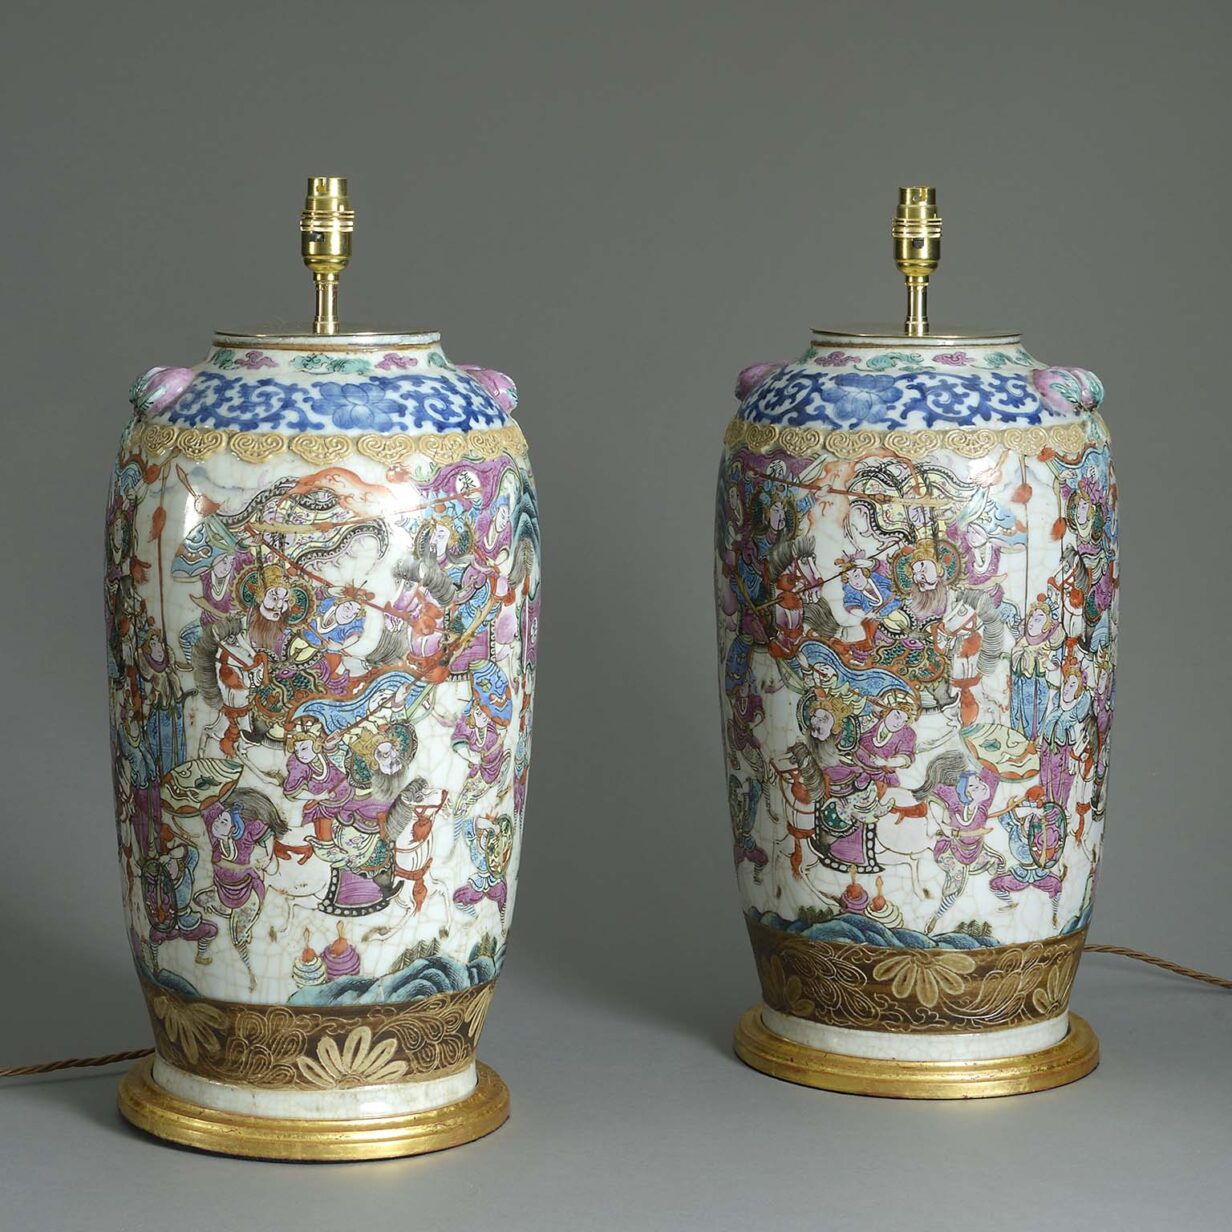 Pair of famille rose lamps